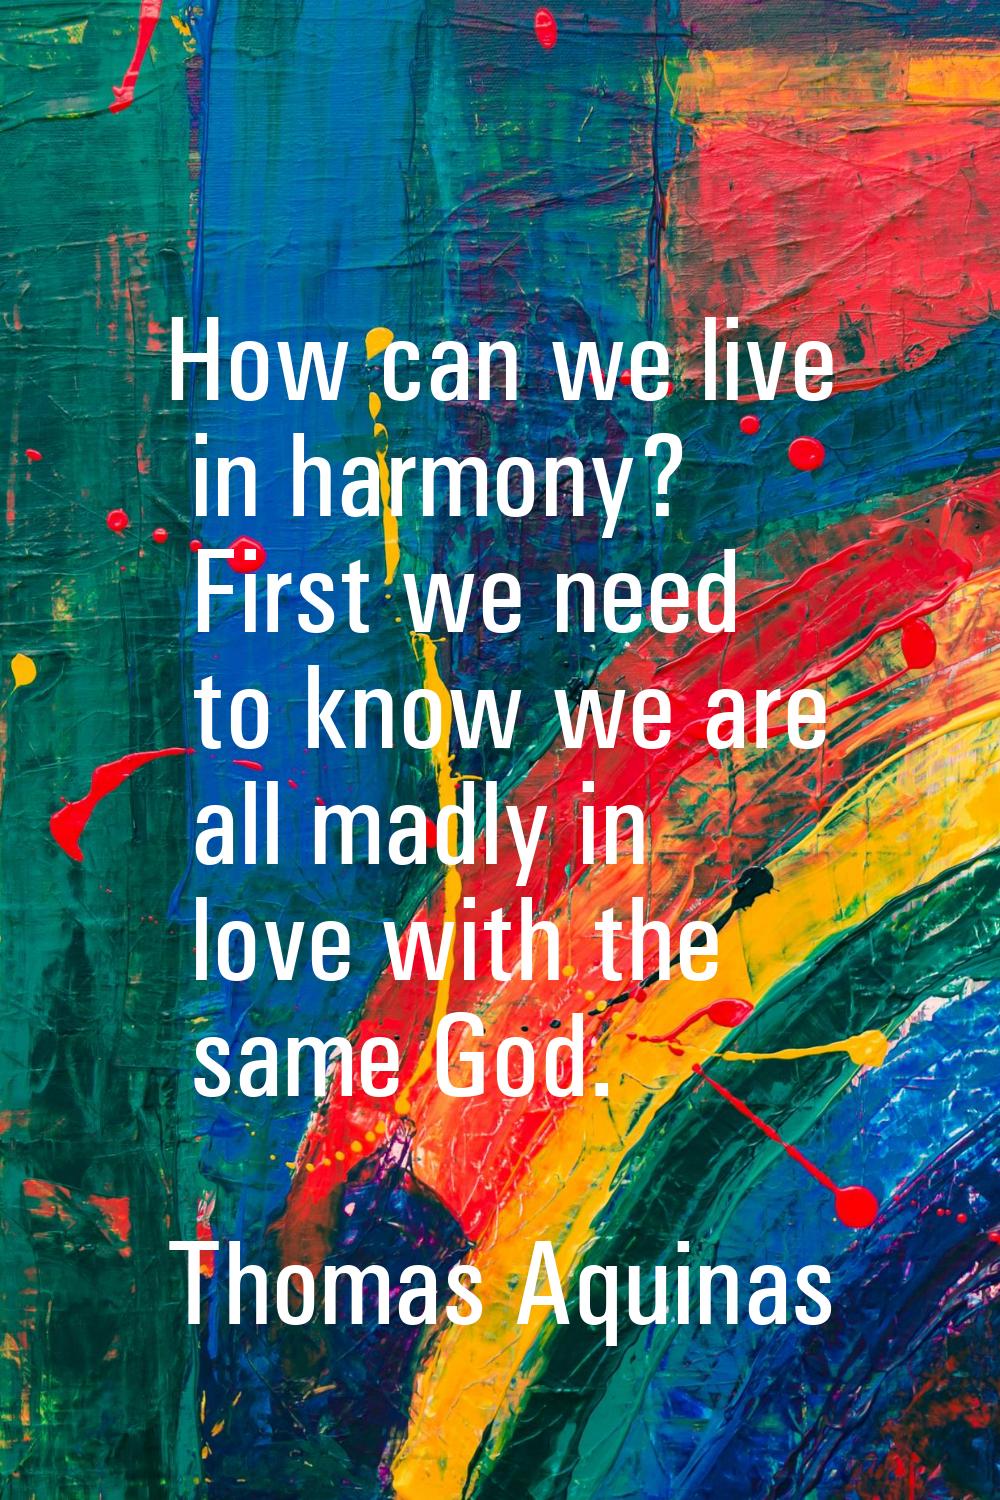 How can we live in harmony? First we need to know we are all madly in love with the same God.